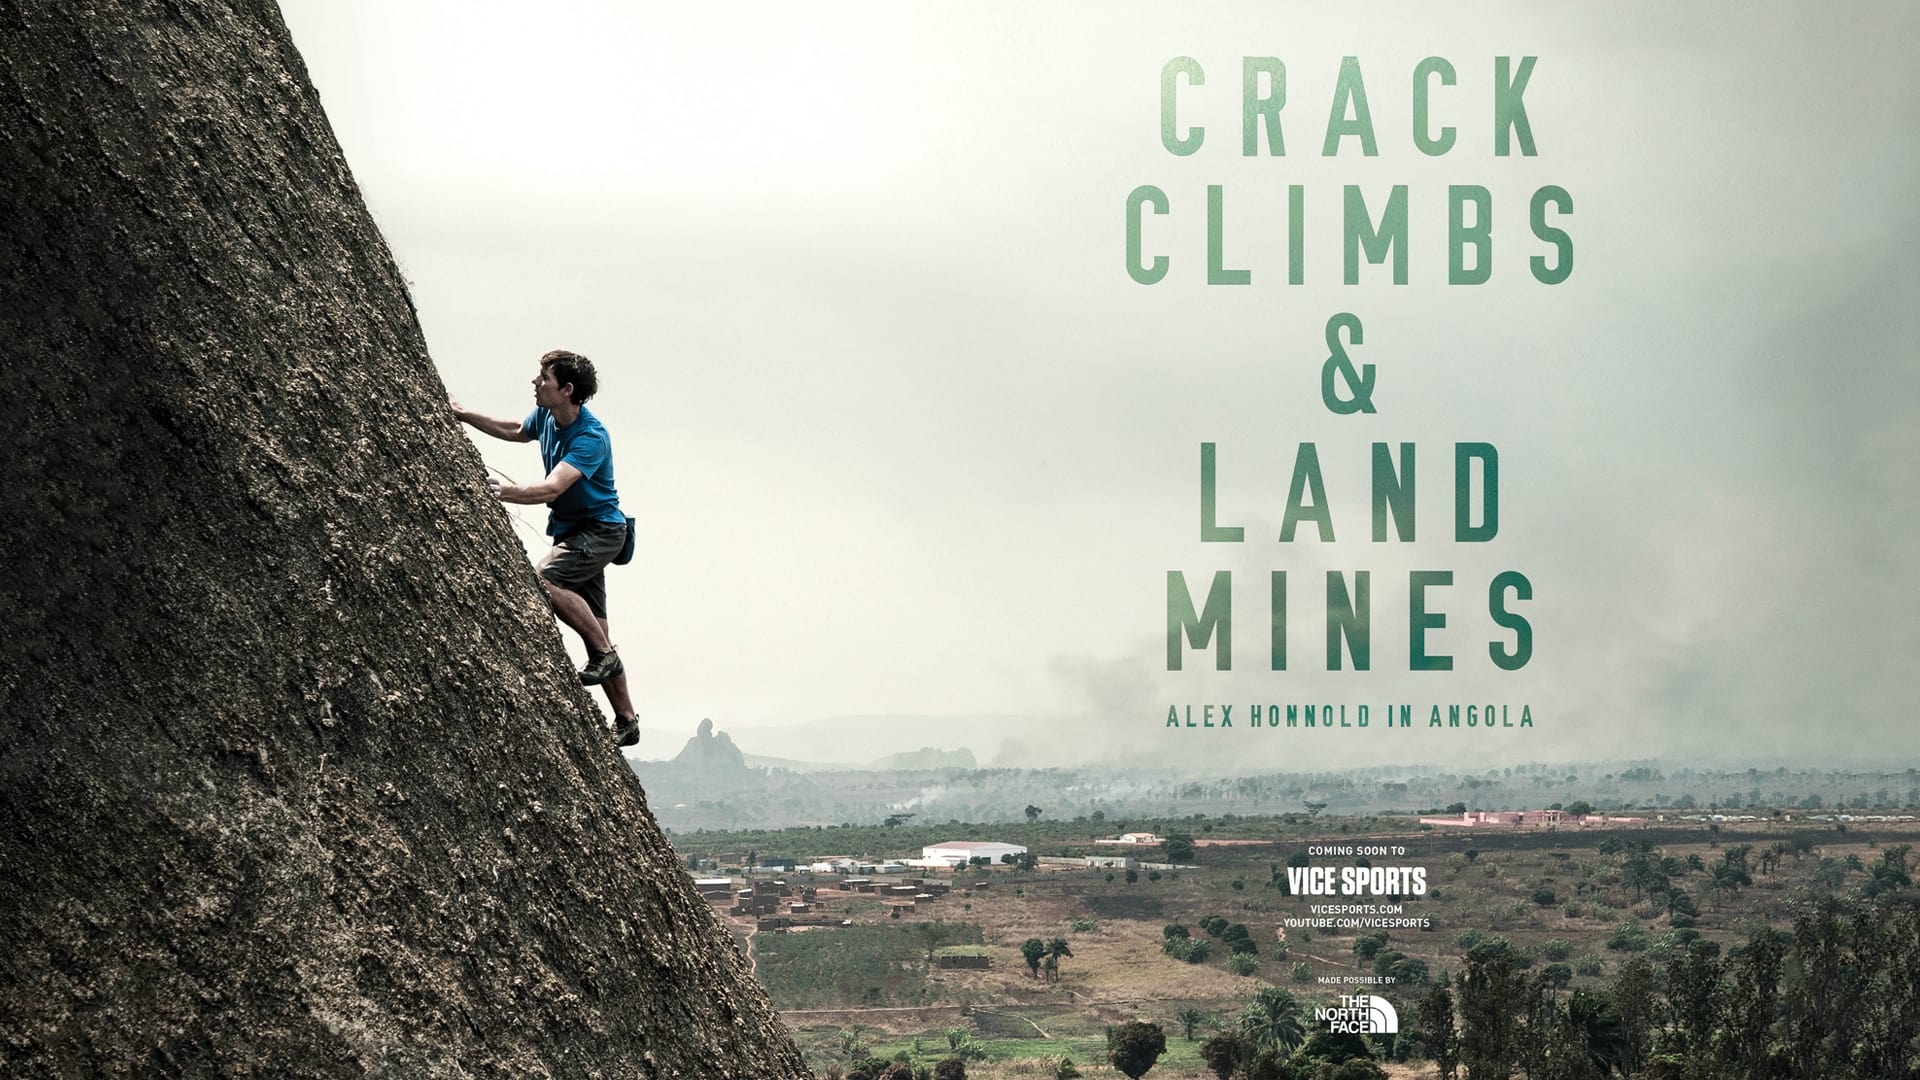 Crack Climbs and Land Mines, Alex Honnold in Angola (2015)